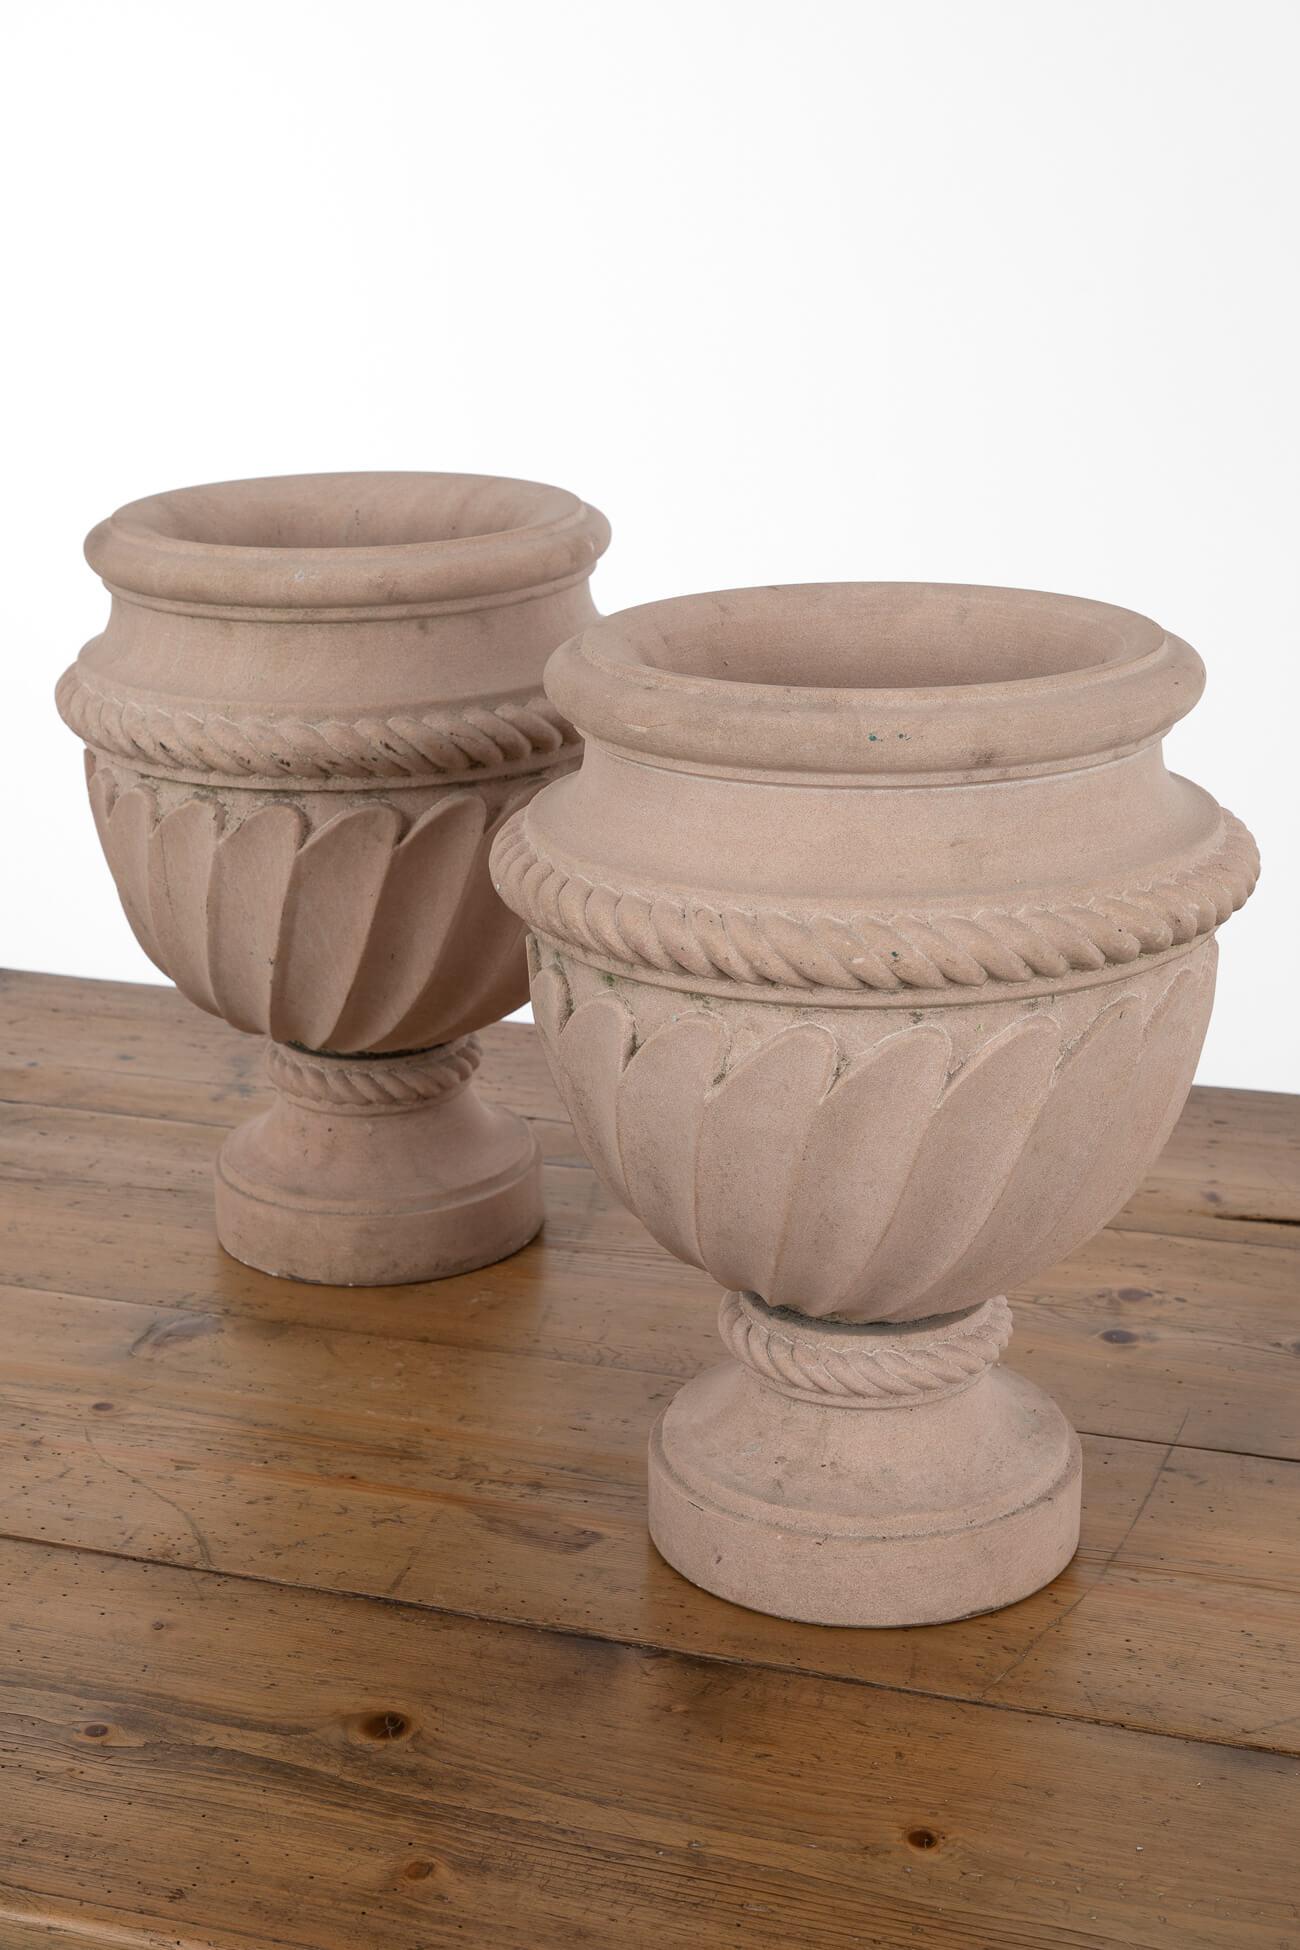 A pair of decoratively carved pink stone urns. Perfect for garden or home alike. Price is for the pair. 
English, 20th century.

Additional information:
H 36 cm (H 29.1 inches)
W 28 cm (W 25.5 inches)
D 28 cm (D 31.4 inches).